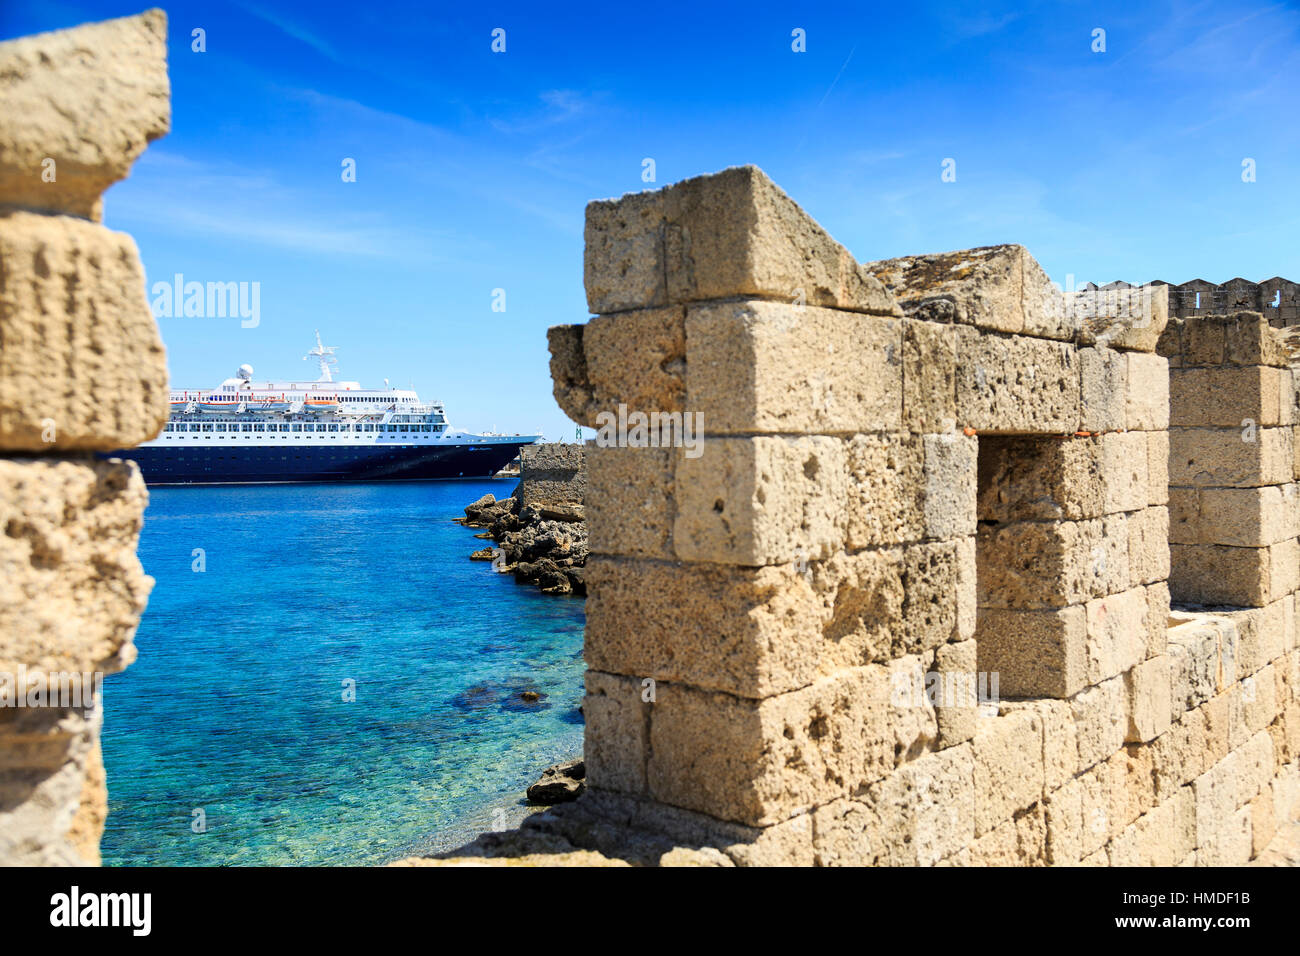 cruise ship moored in rhodes town, rhodes greece, viewed through old city walls Stock Photo